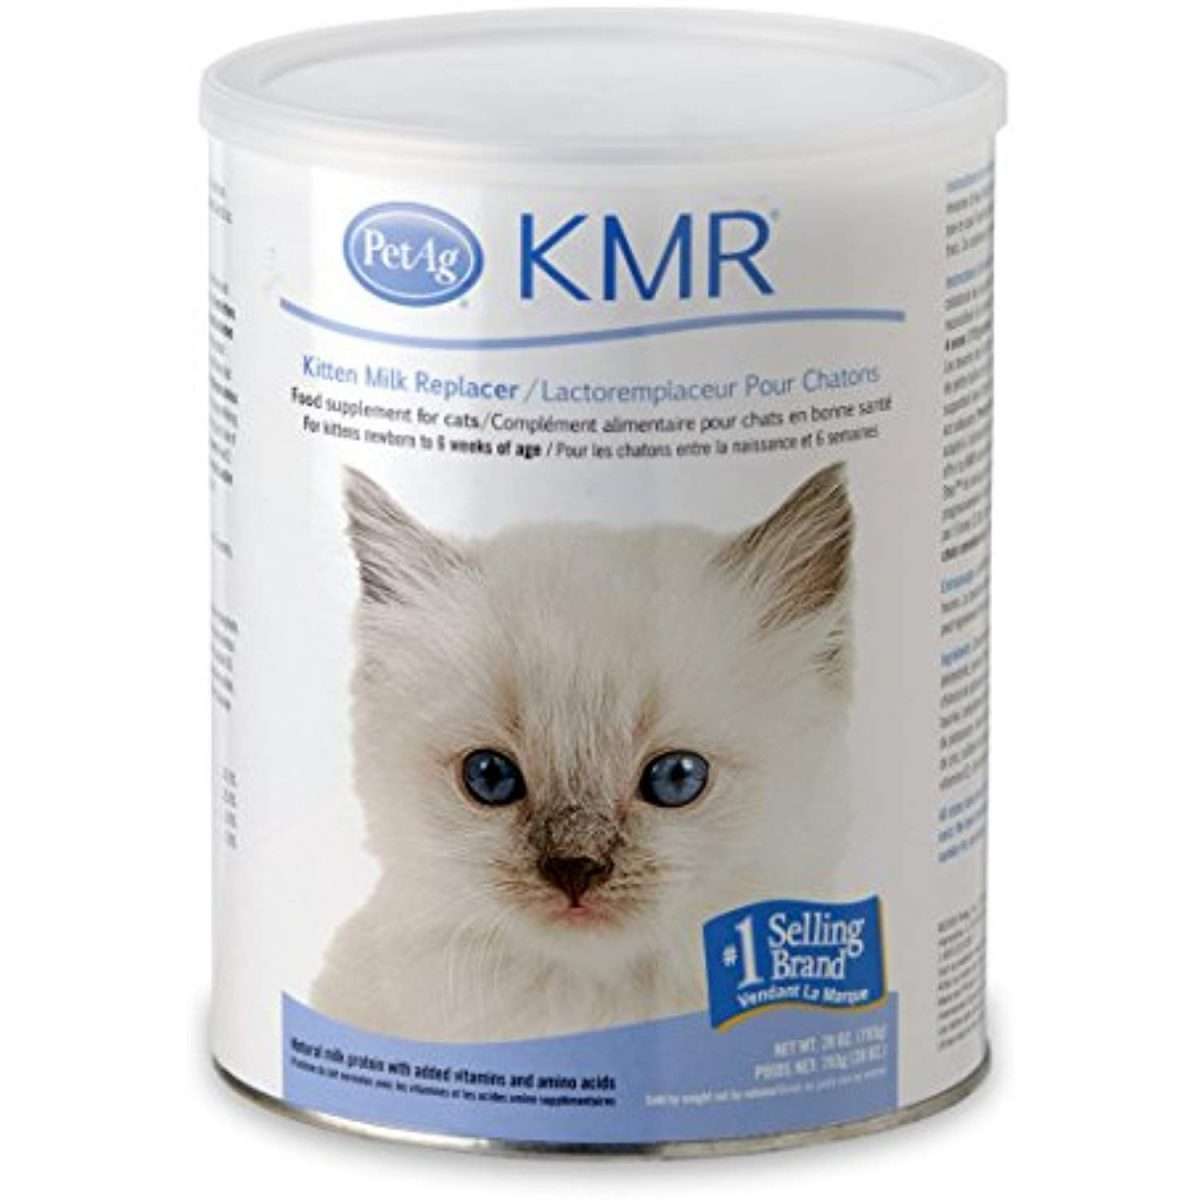 What To Feed Kittens With Diarrhea